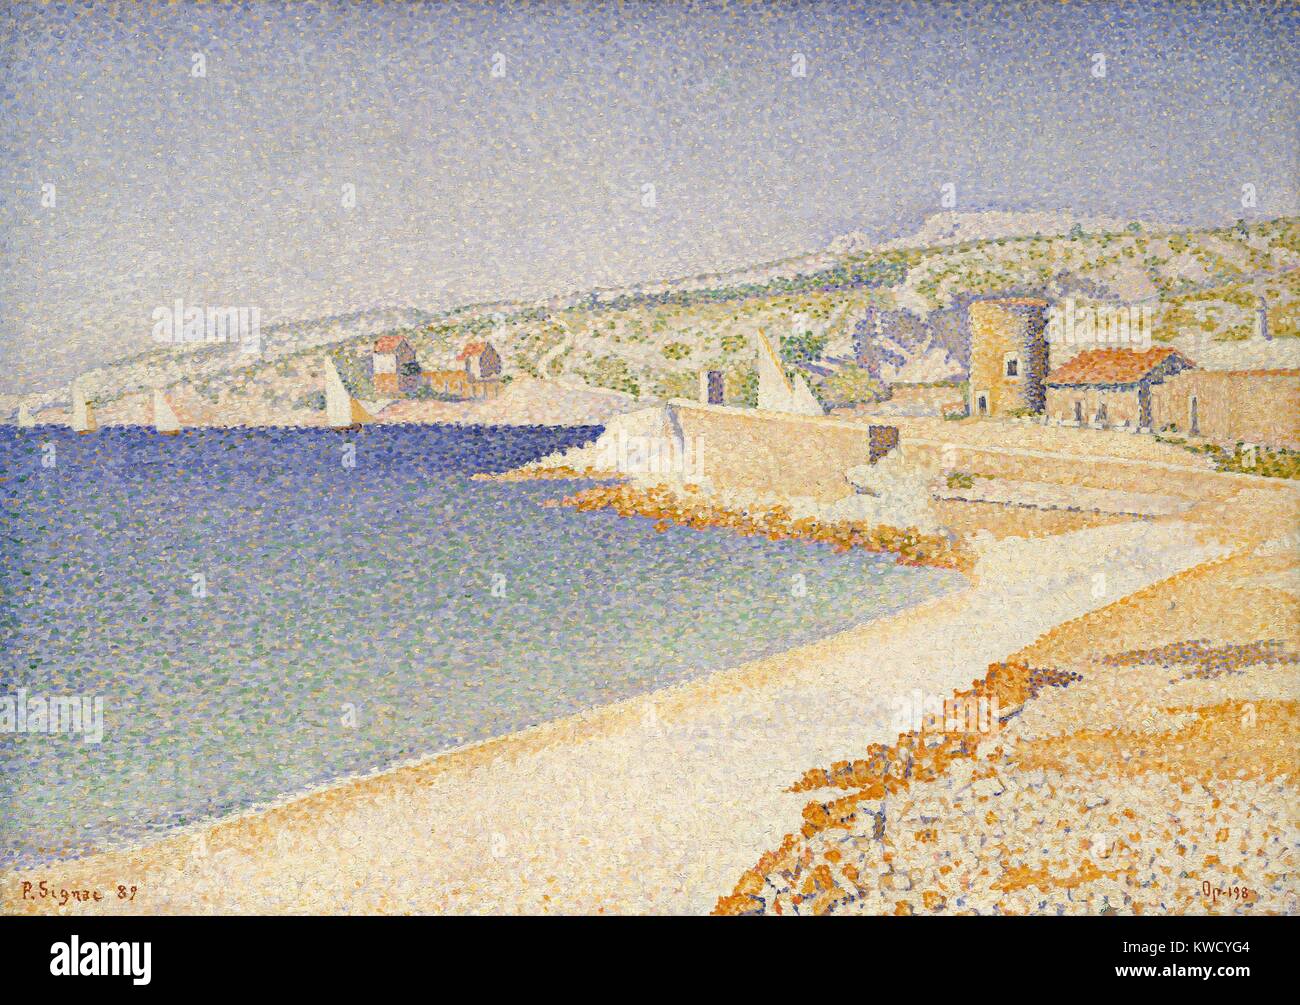 The Jetty at Cassis, Opus 198, by Paul Signac, 1889, French Post-Impressionist, oil on canvas. This painting of the Mediterranean port was singled out for praise when the series was exhibited at the Salon des Independants in 1889. Signac described his exp (BSLOC 2017 5 89) Stock Photo